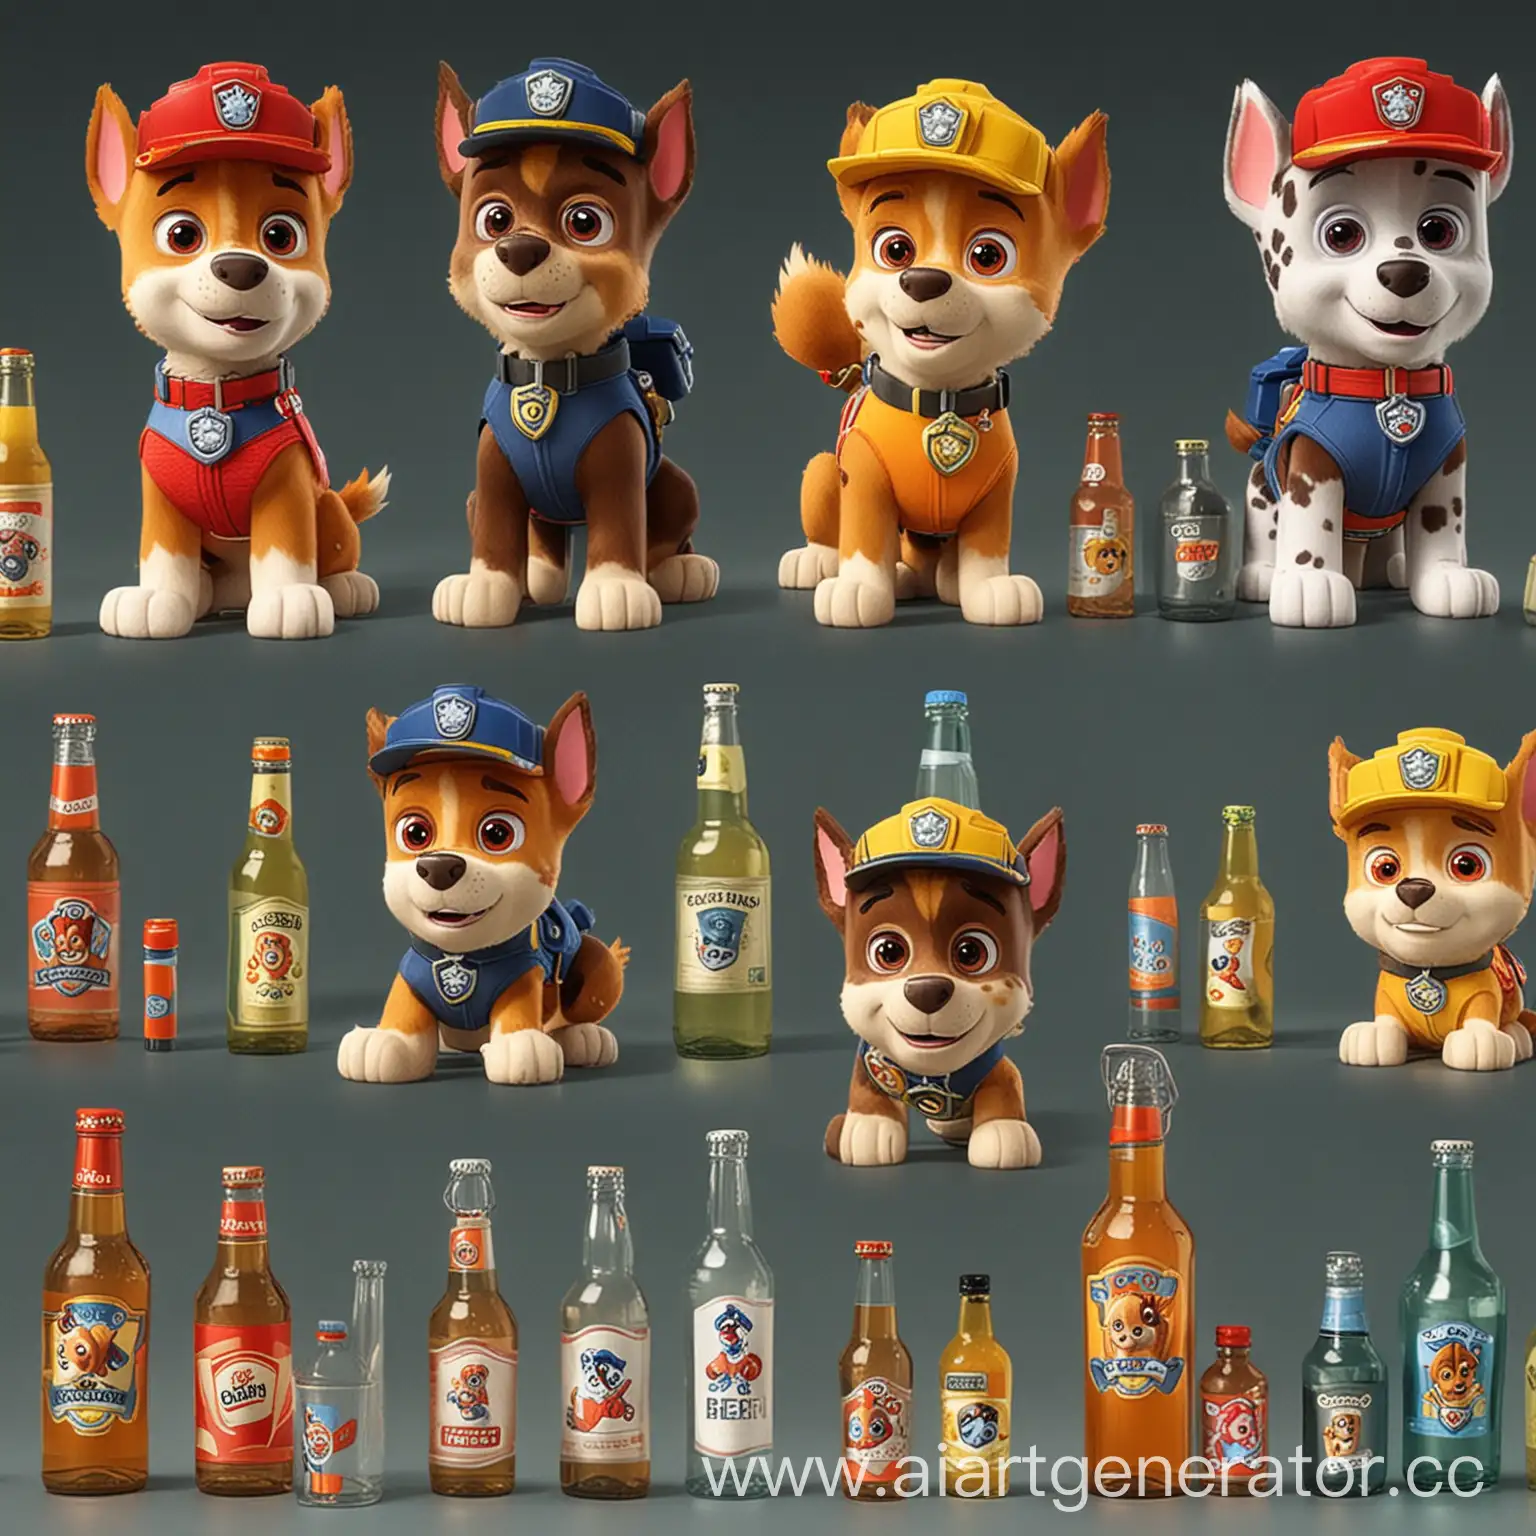 Paw-Patrol-Characters-Celebrating-with-Beer-Bottles